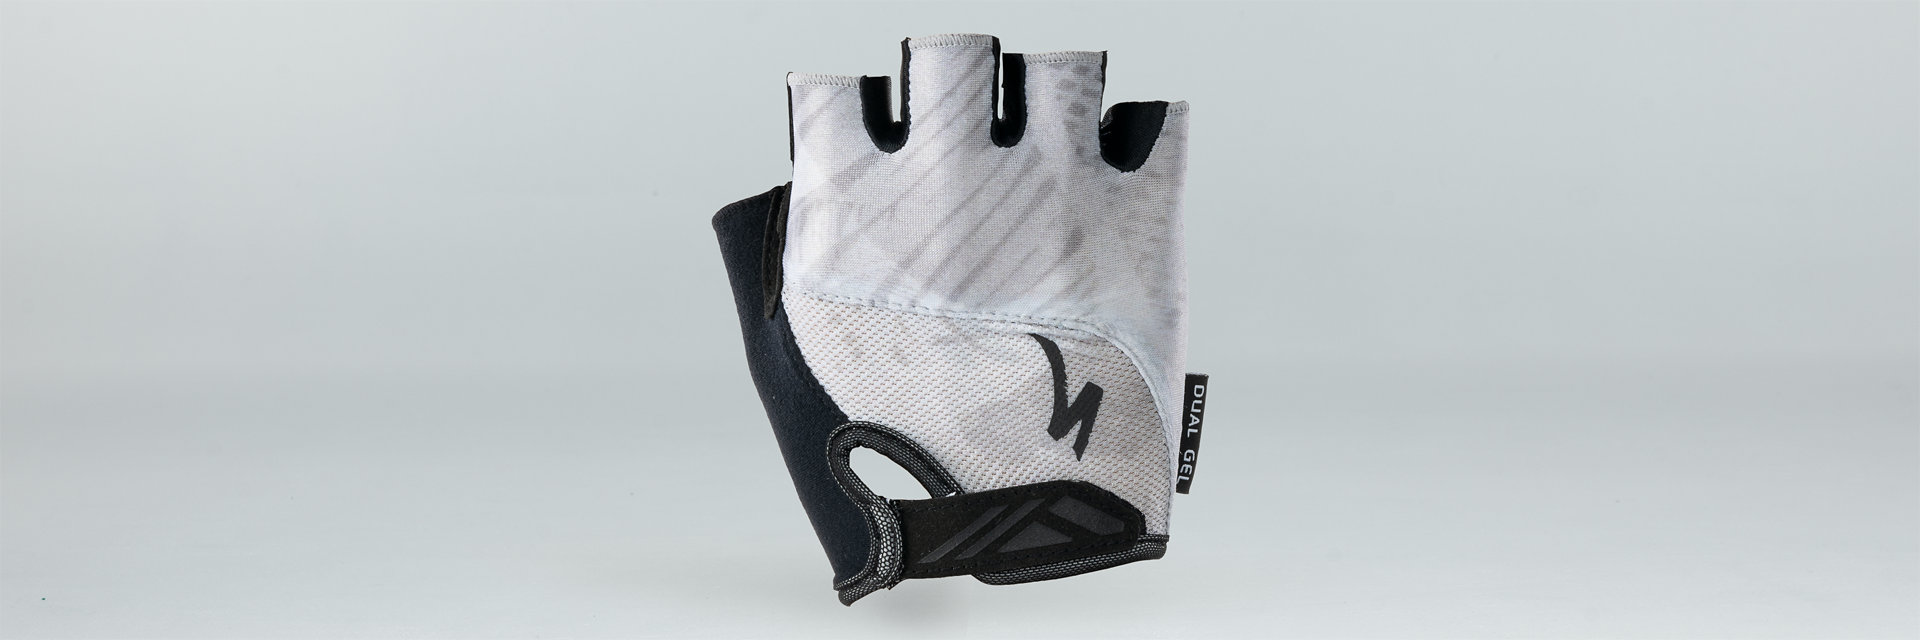 Padded Gloves by Specialized